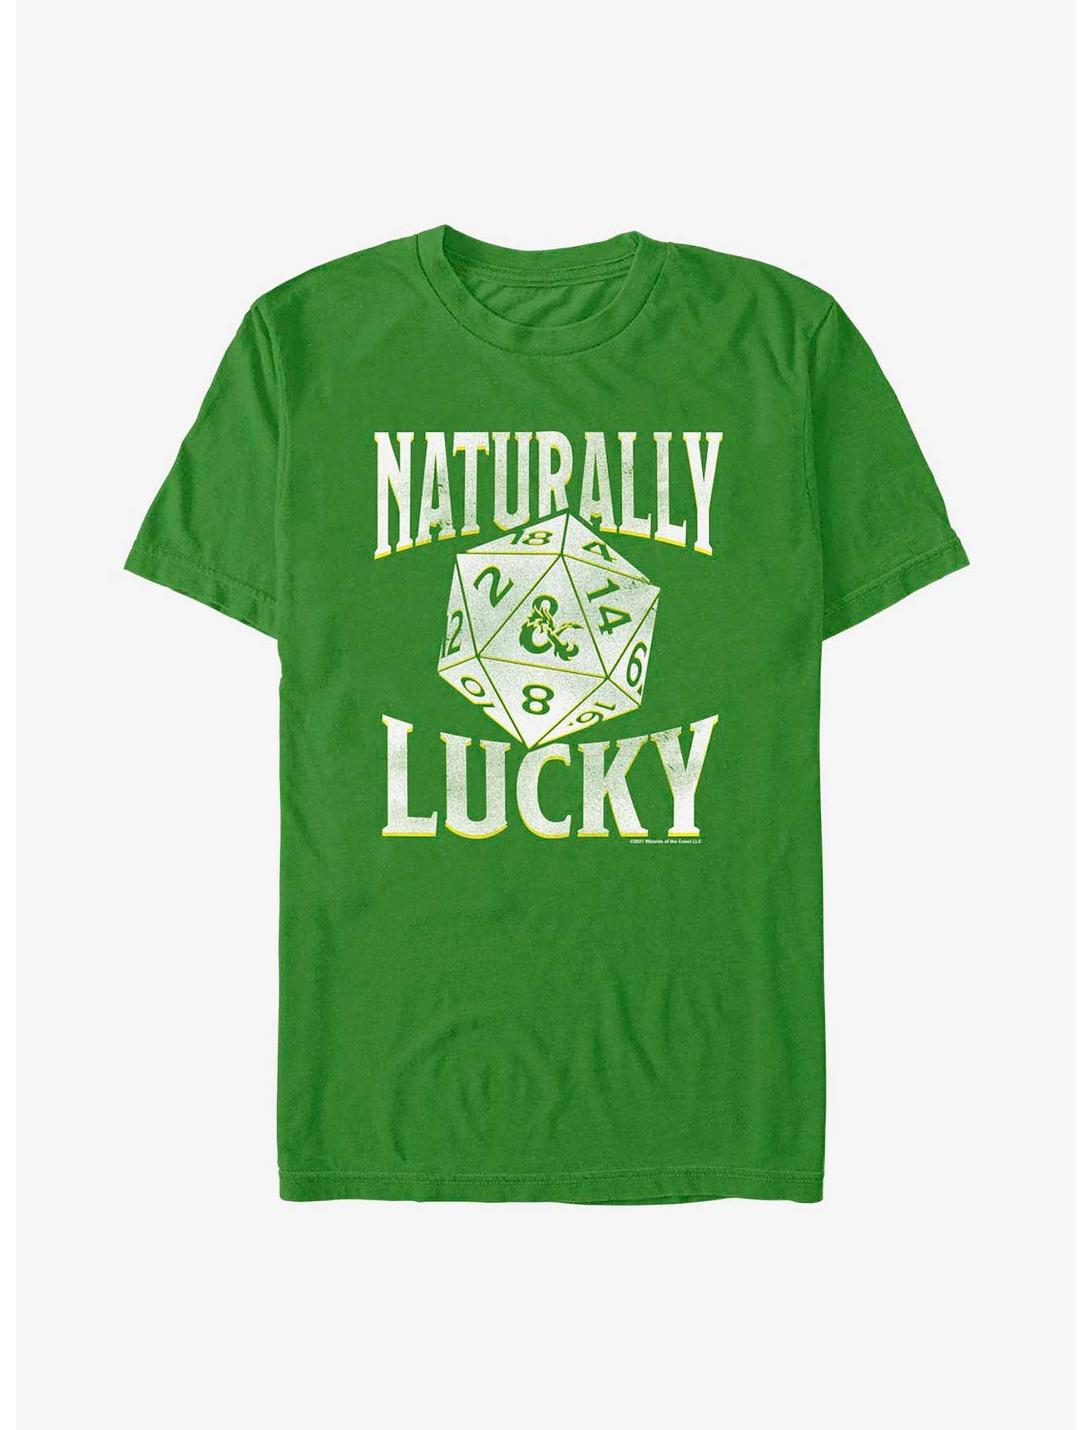 Dungeons & Dragons Naturally Lucky T-Shirt, KELLY, hi-res